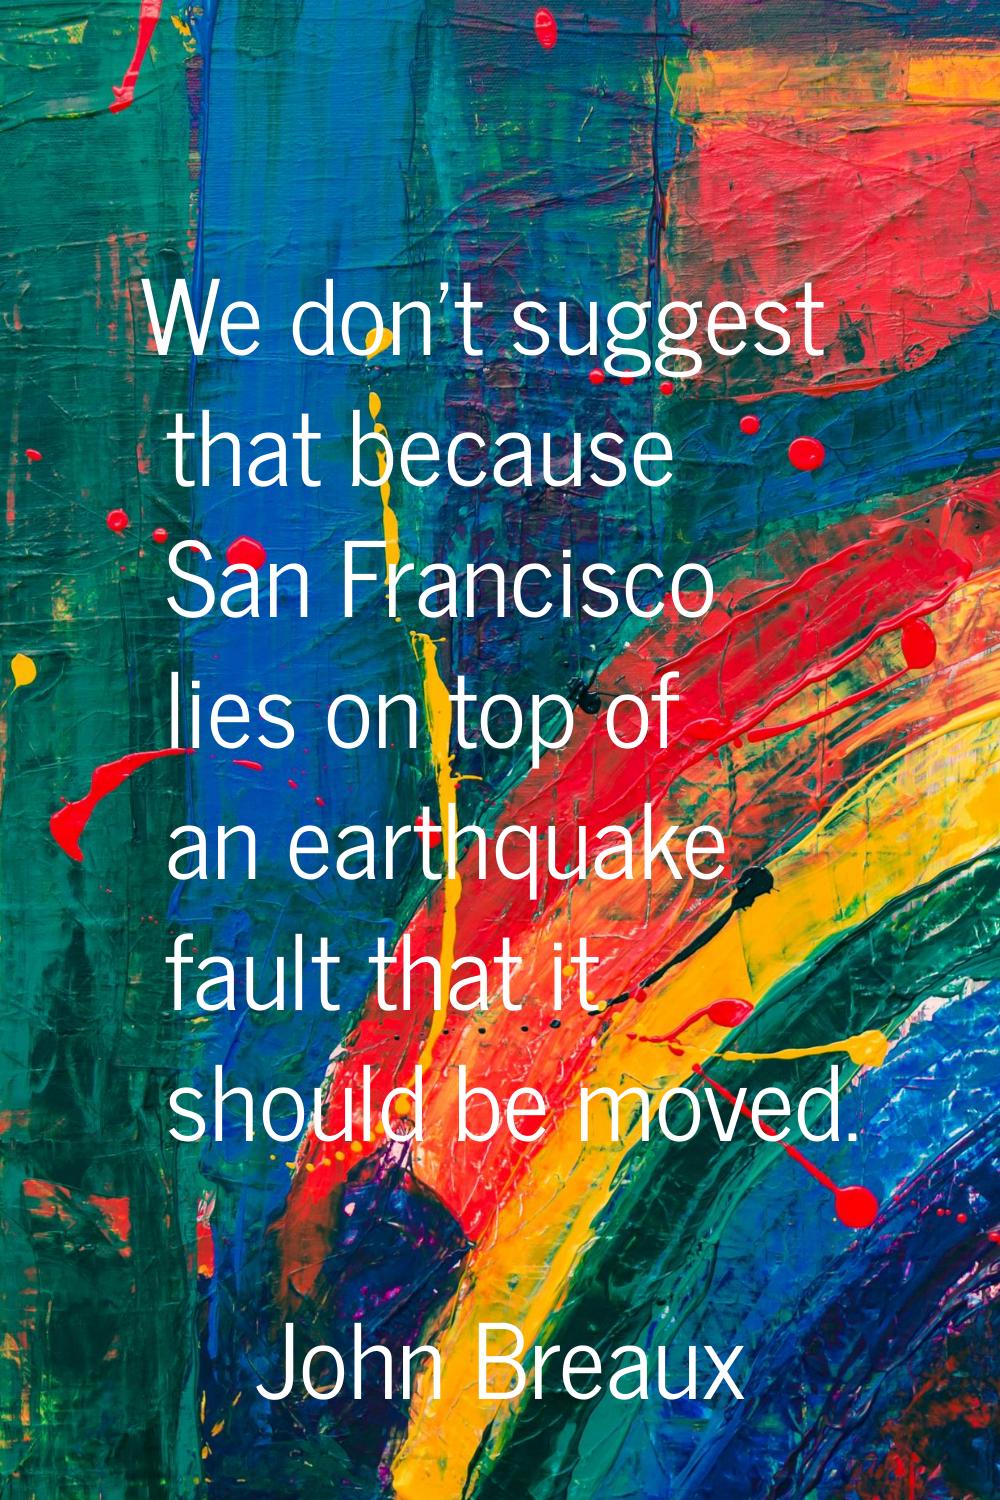 We don't suggest that because San Francisco lies on top of an earthquake fault that it should be mo